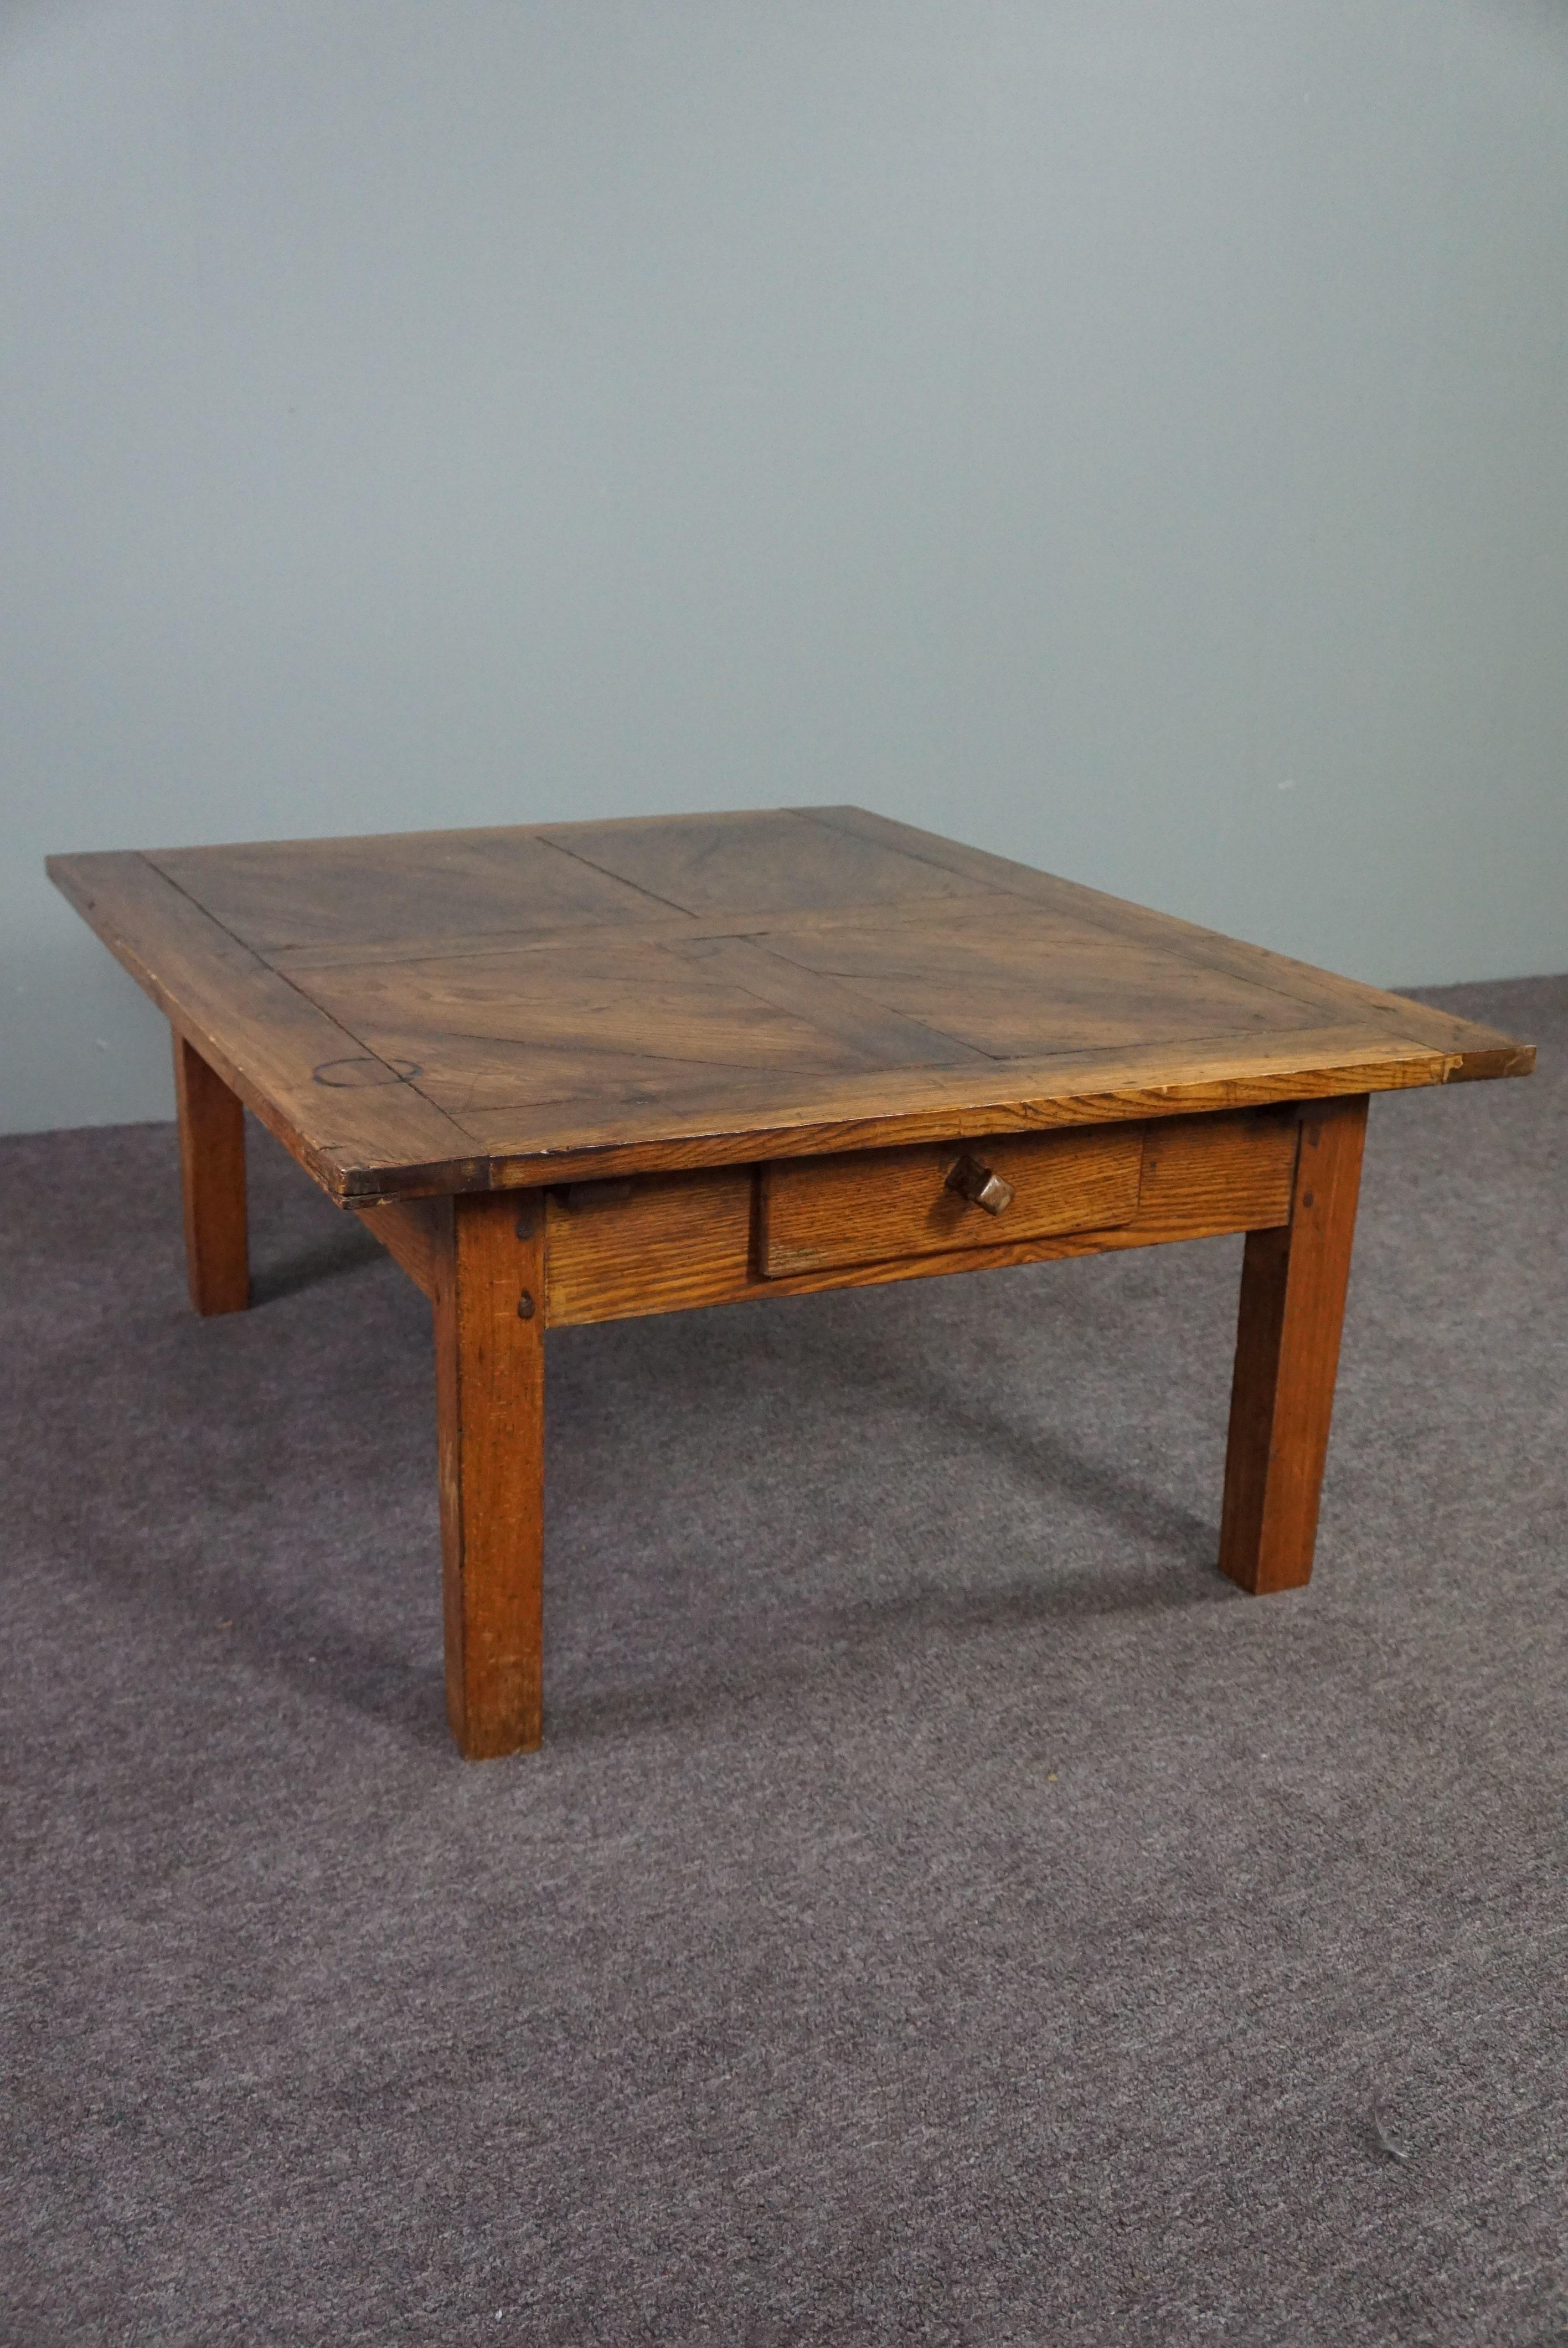 This Southern European coffee table has a beautiful pattern in the top, a warm color and a striking patina. Over the years, this deeply colored coffee table has acquired a striking warm appearance and will therefore look great in many living